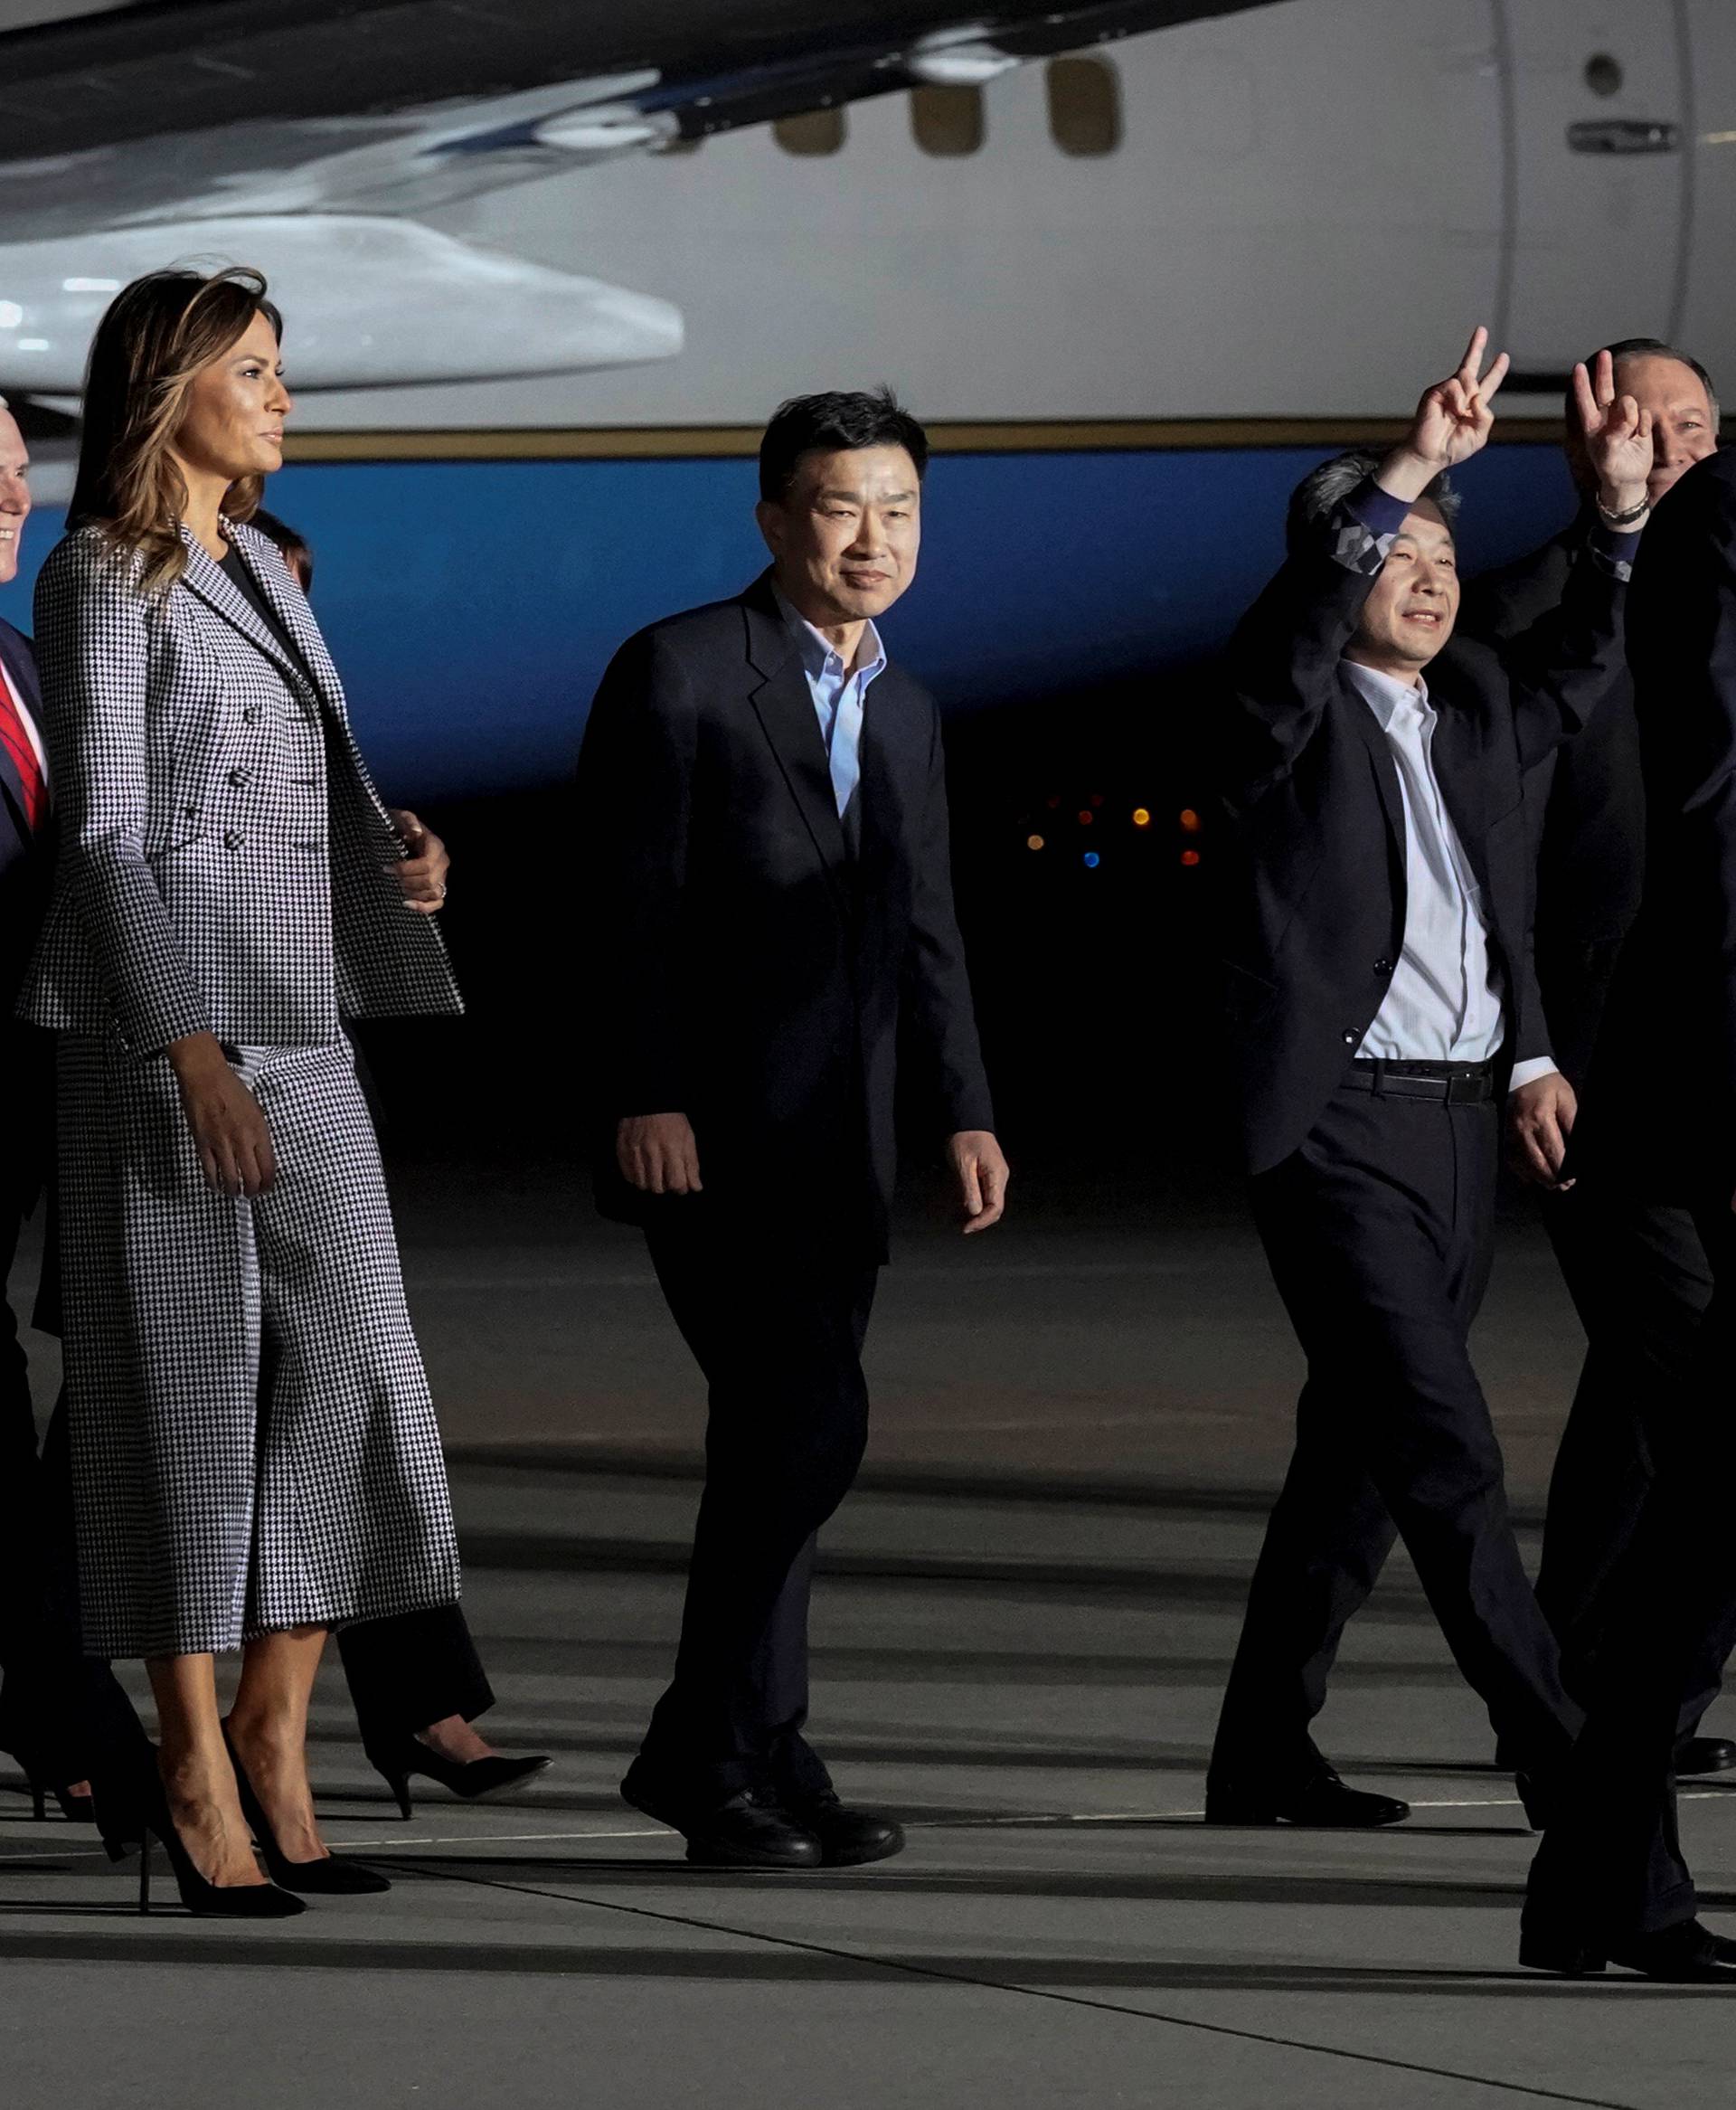 The three Americans released from detention in North Korea, Tony Kim, Kim Hak-song and Kim Dong-chul, walk next to U.S.President Donald Trump as they arrive at Joint Base Andrews